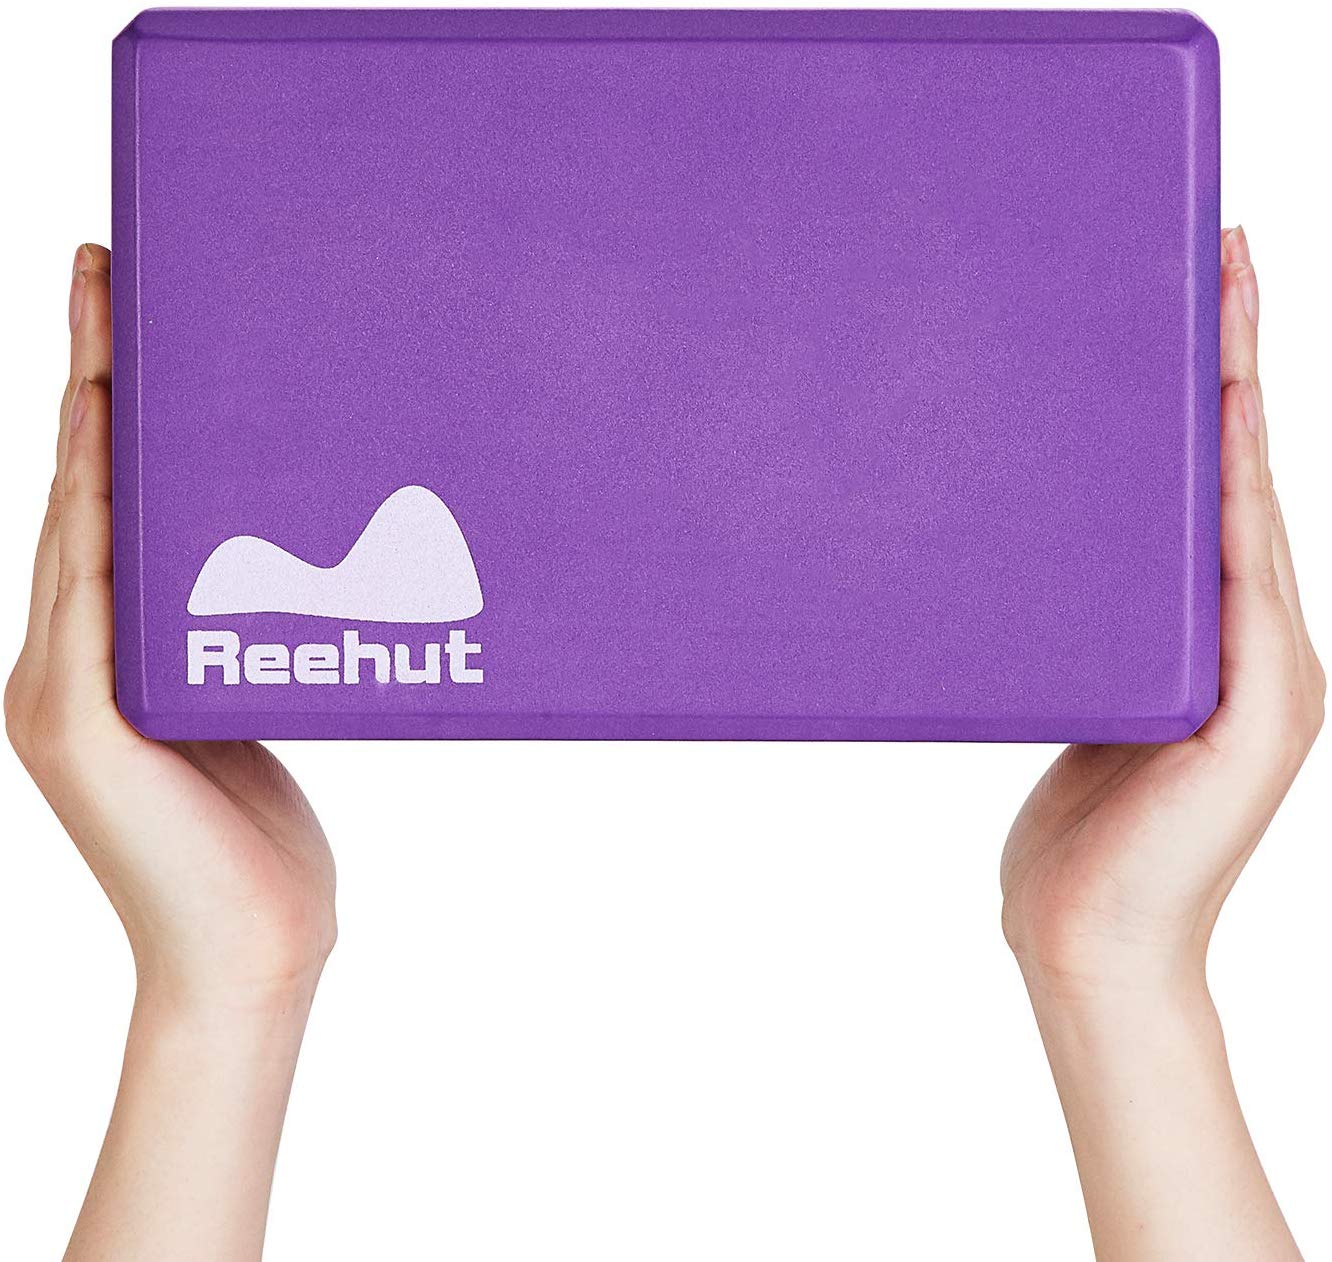 Improve Strength and Aid Balance and Flexibility Odor Resistant High Density EVA Foam Blocks to Support and Deepen Poses REEHUT Yoga Blocks 1-PC/ 2-PC Lightweight 